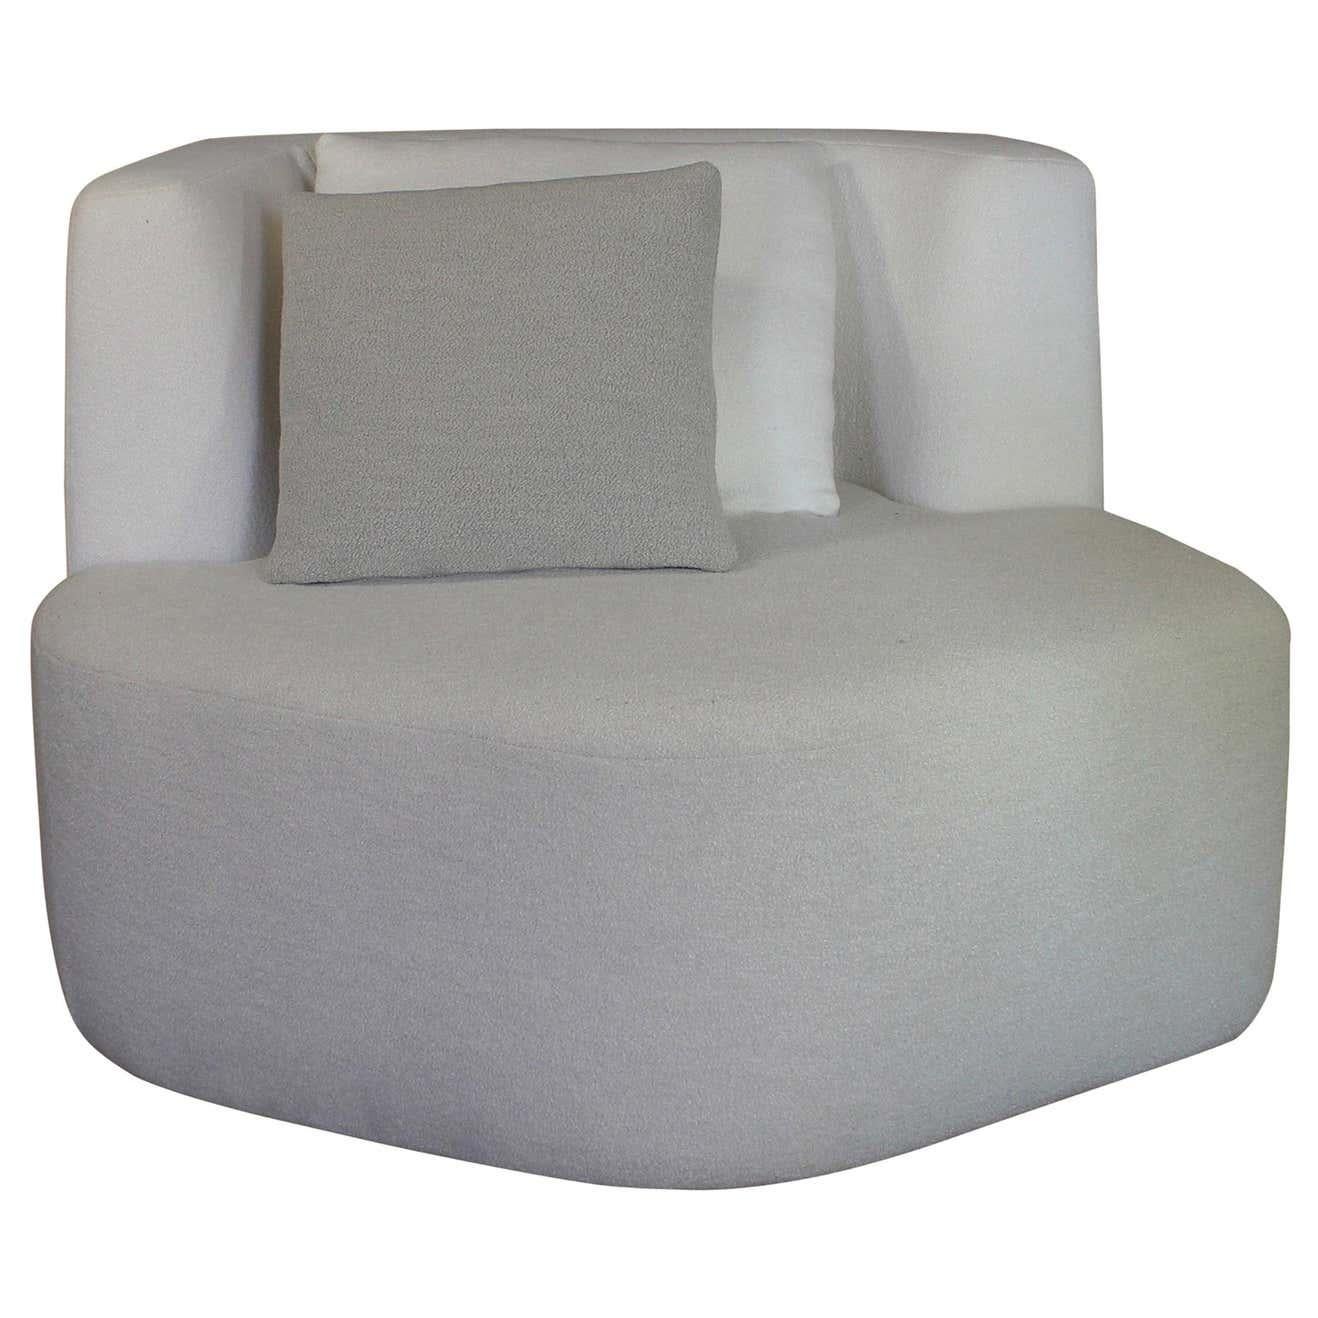 1 Module Pierre Chair by Plumbum For Sale